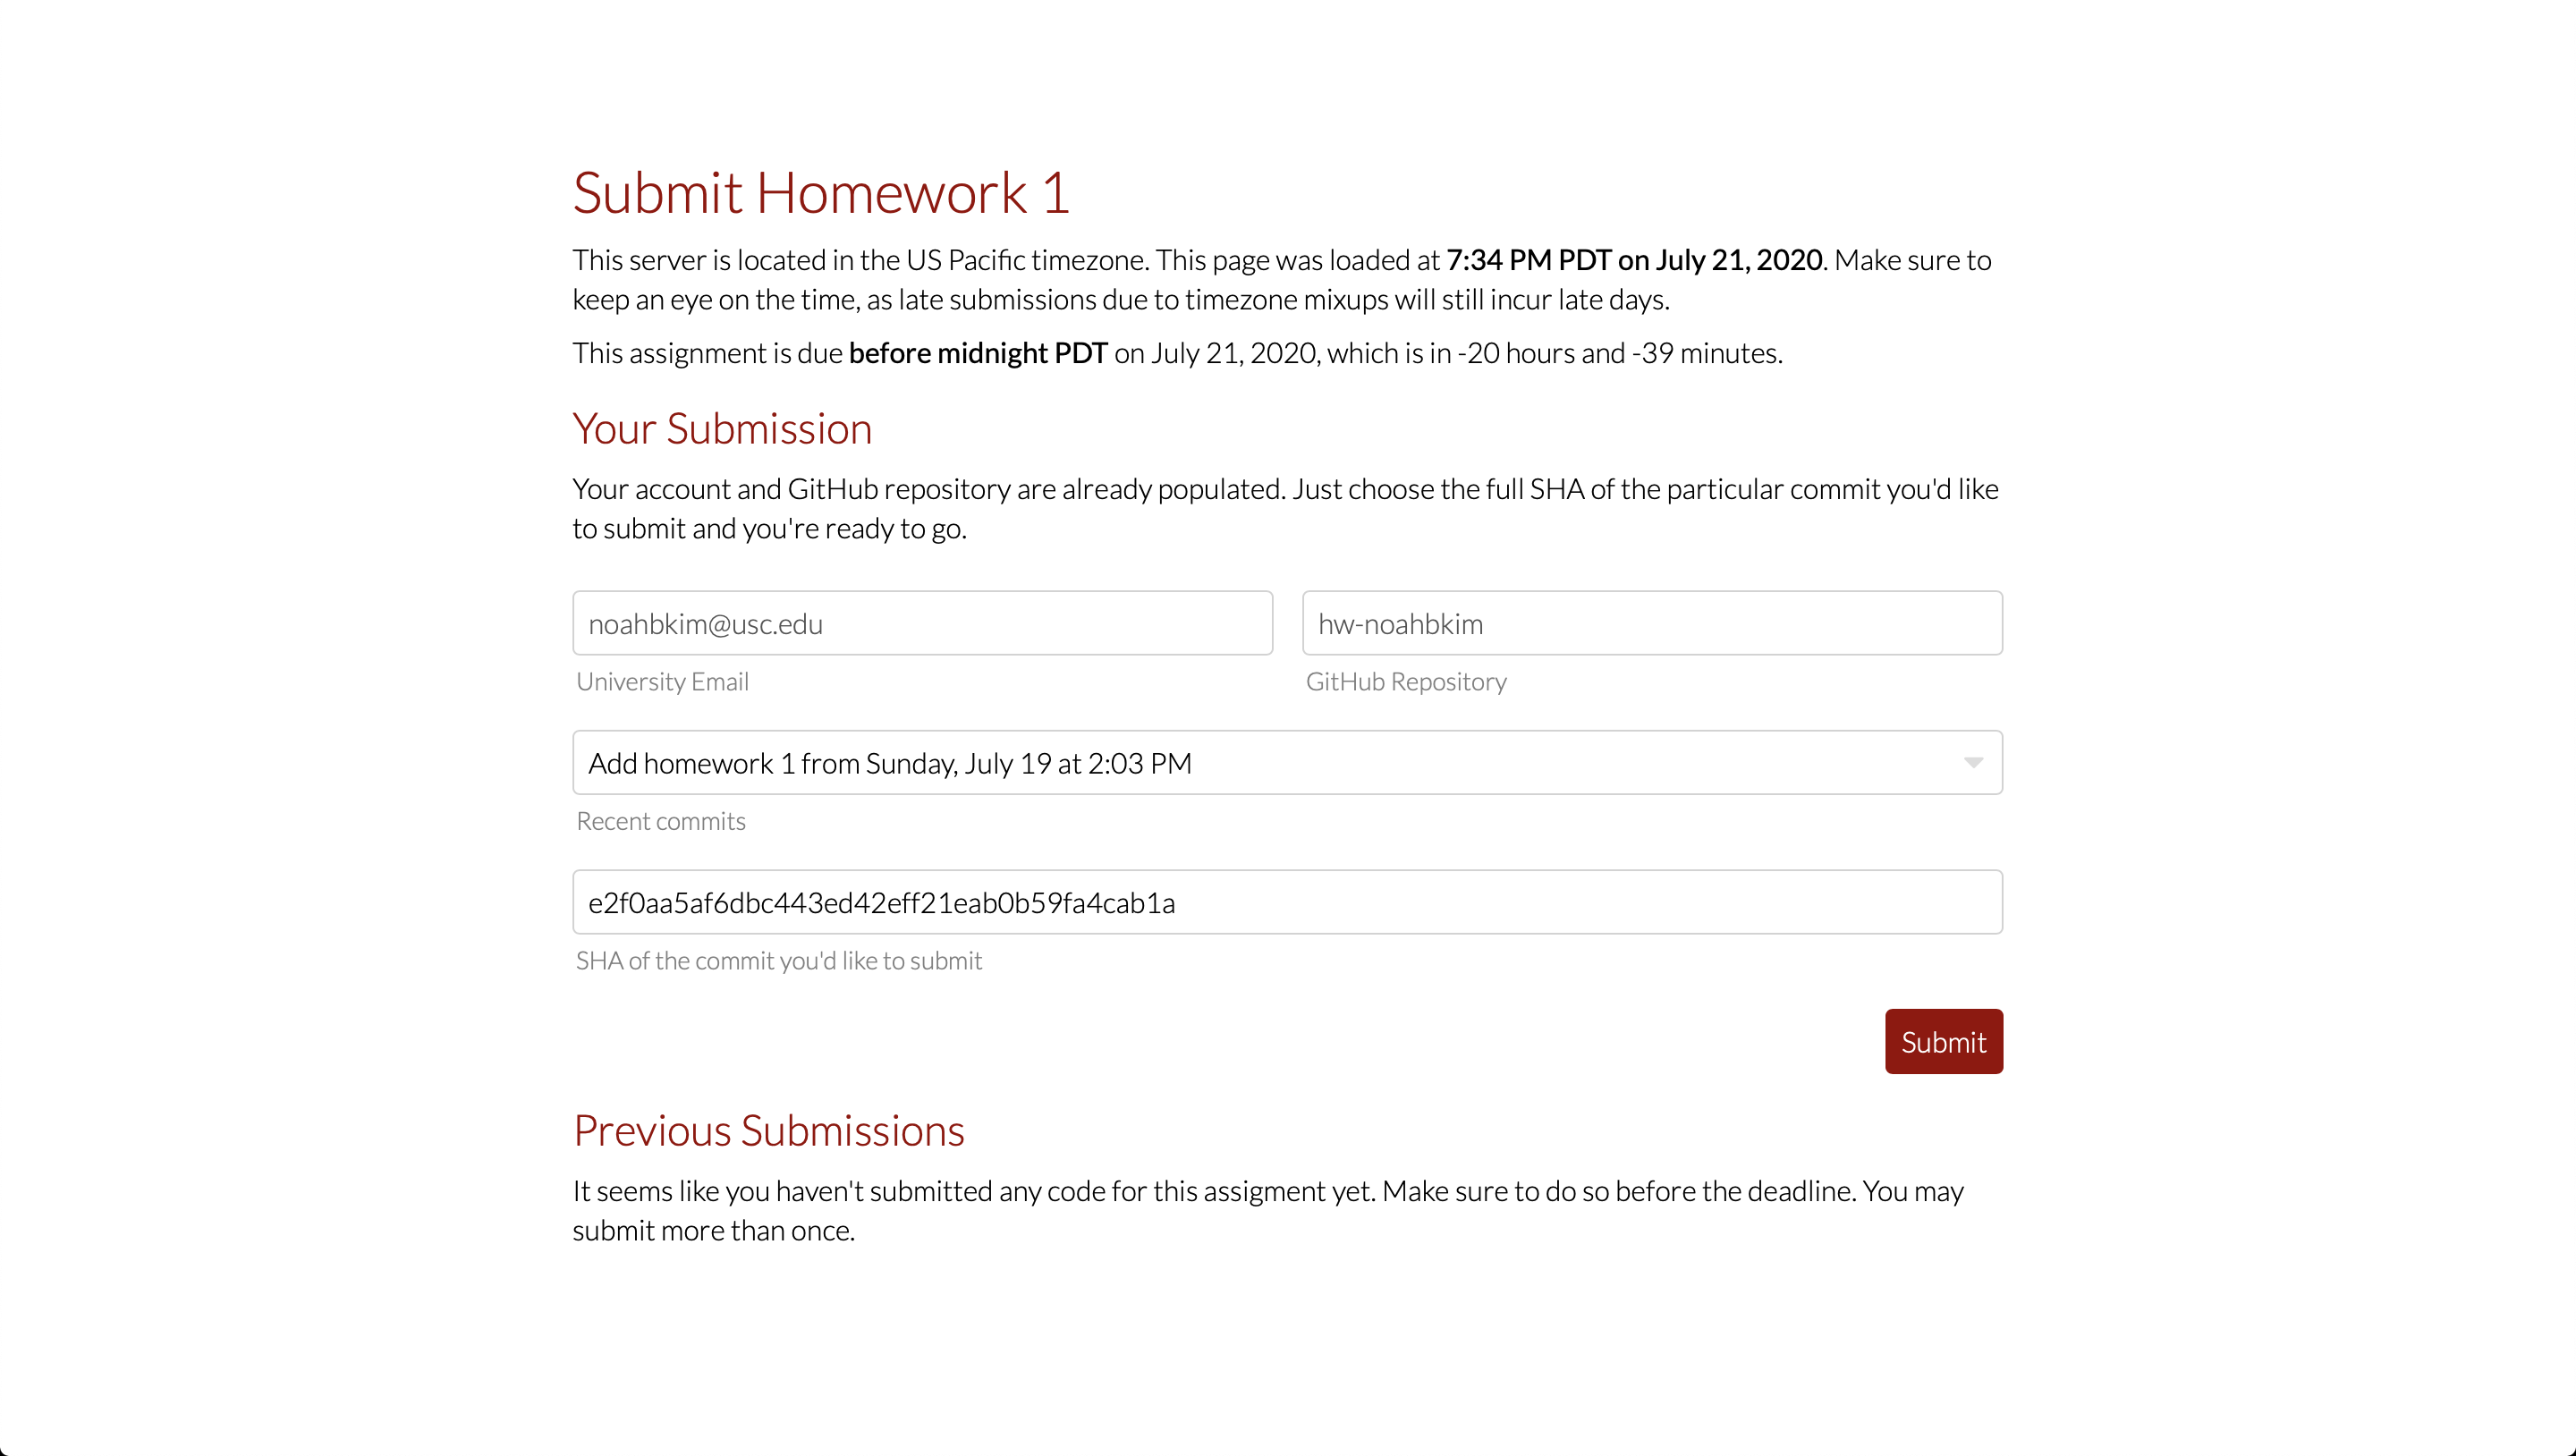 A screenshot from the online submission form. The rollout of this feature marked a significant step forward in our submission process, as it facilitated sanity checks and instant feedback on submissions.